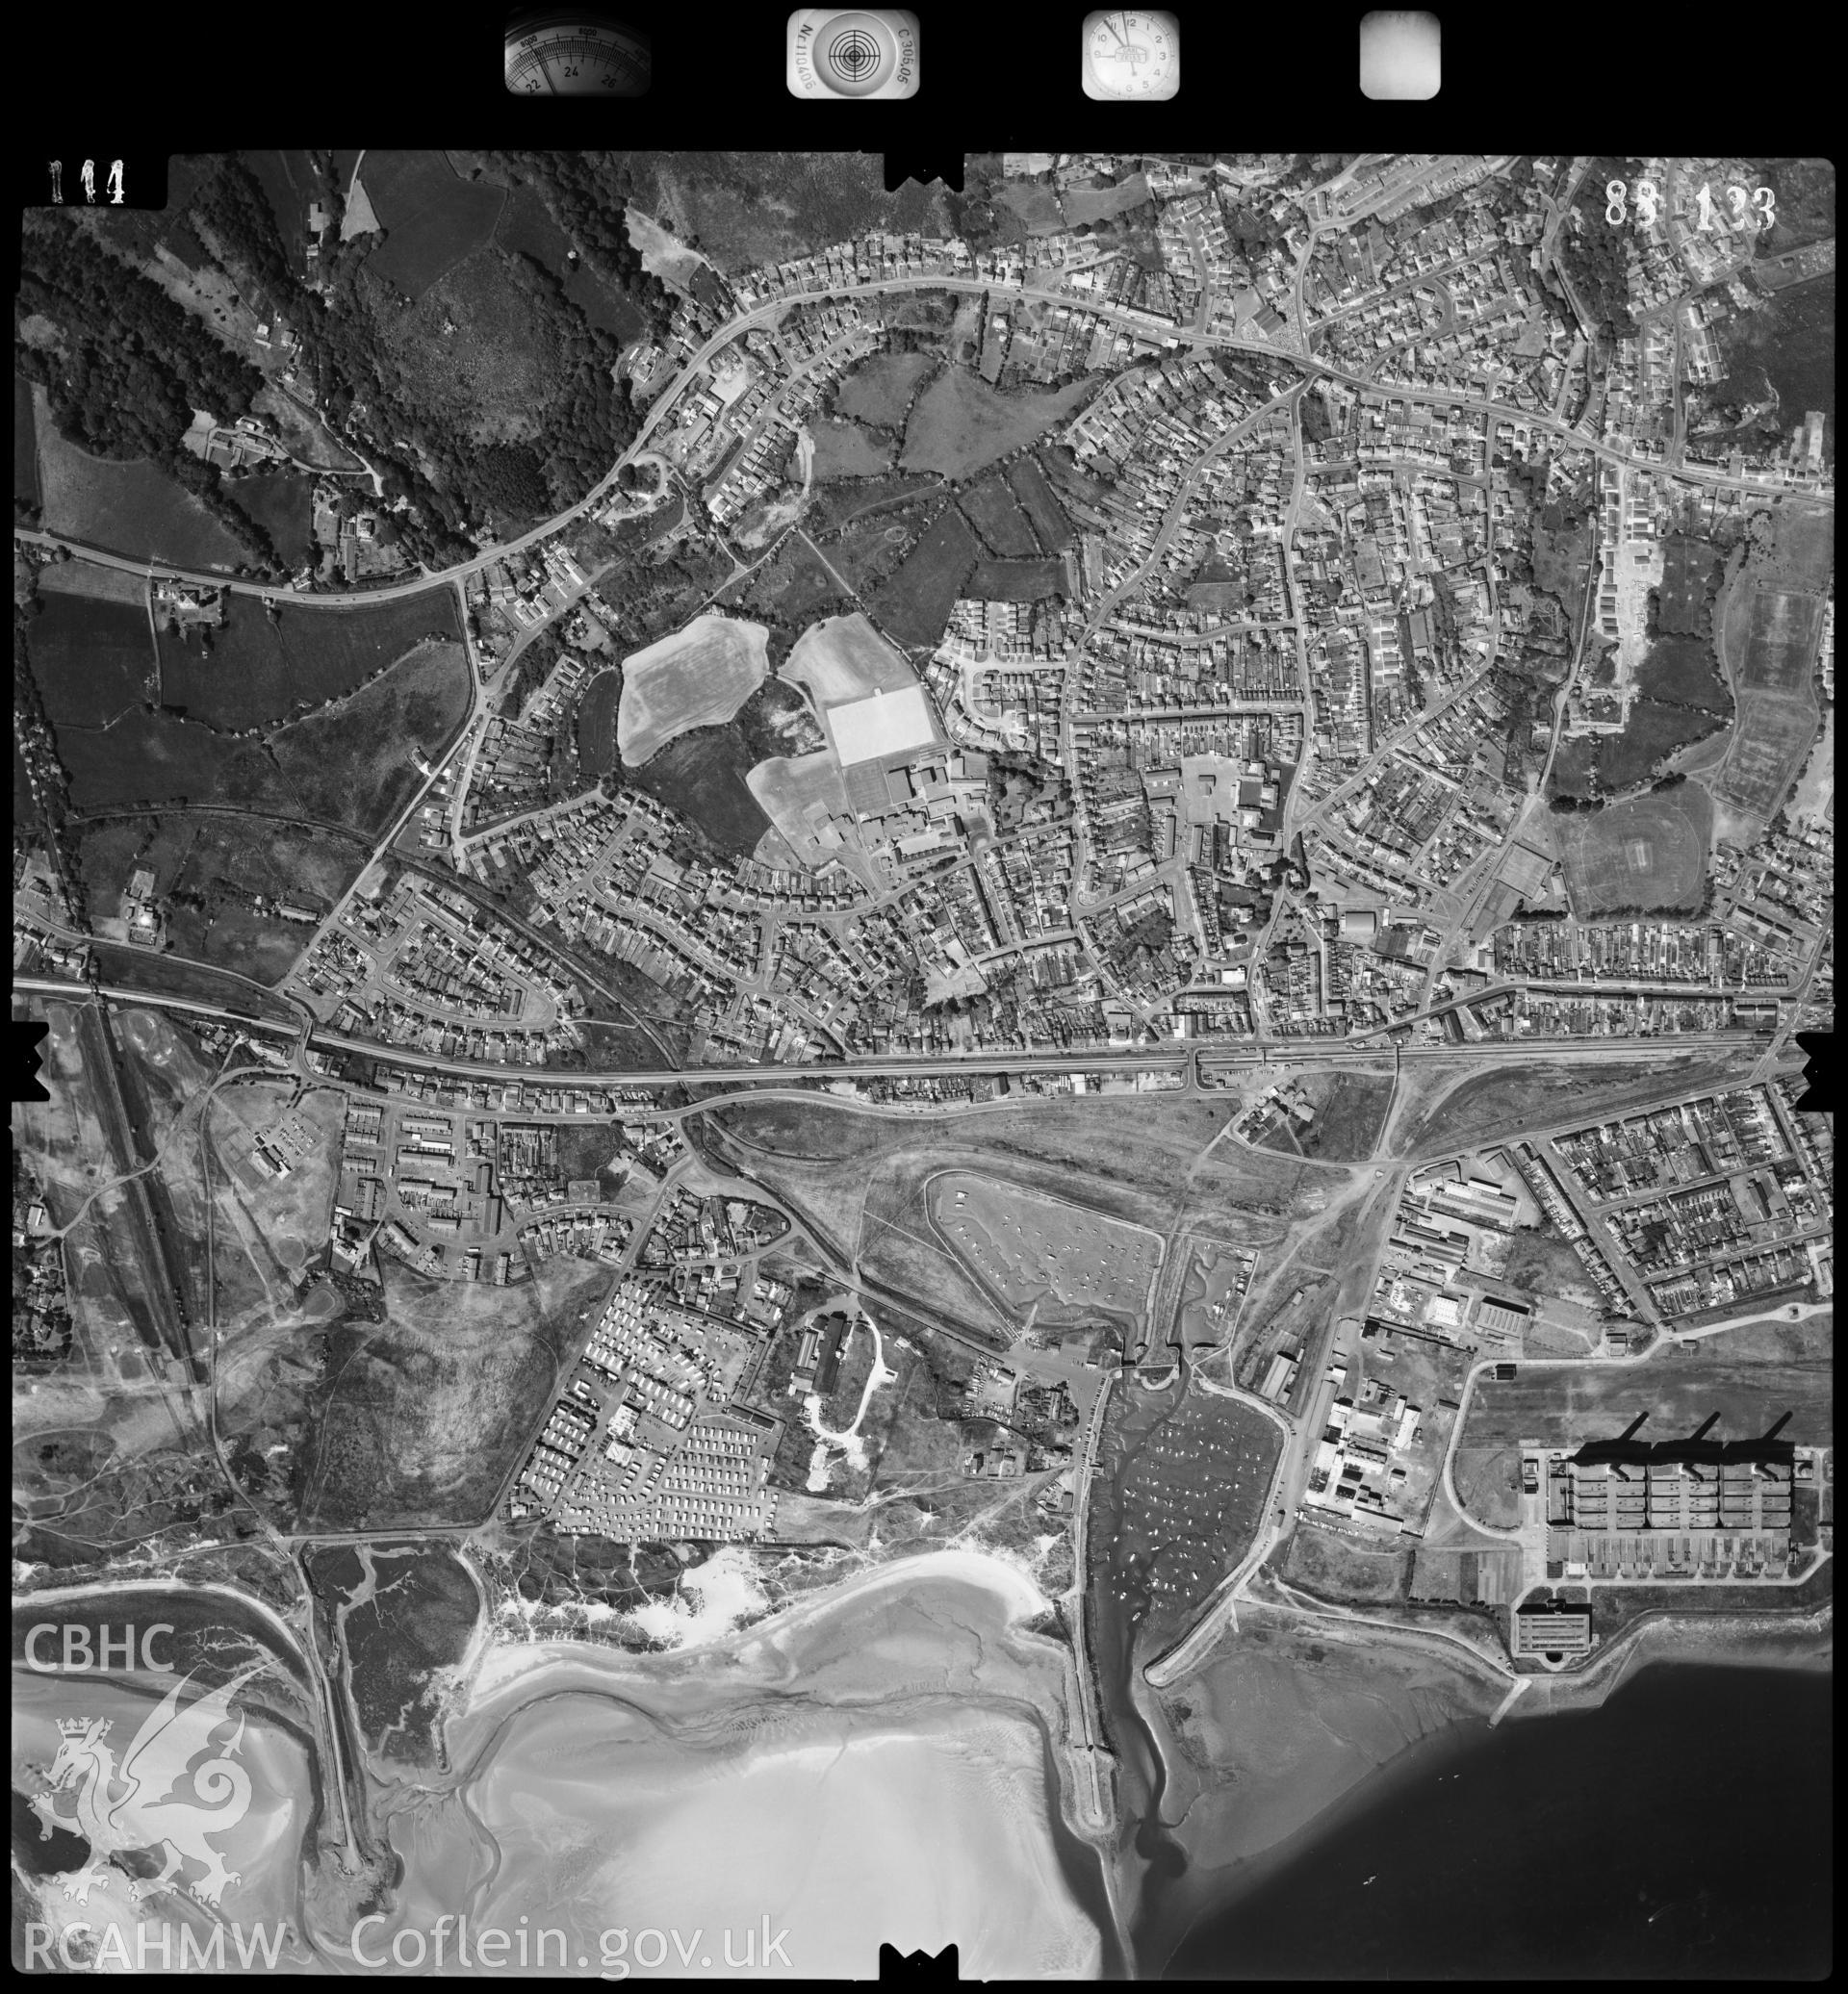 Digitized copy of an aerial photograph showing Burry Port area, taken by Ordnance Survey, 1988.